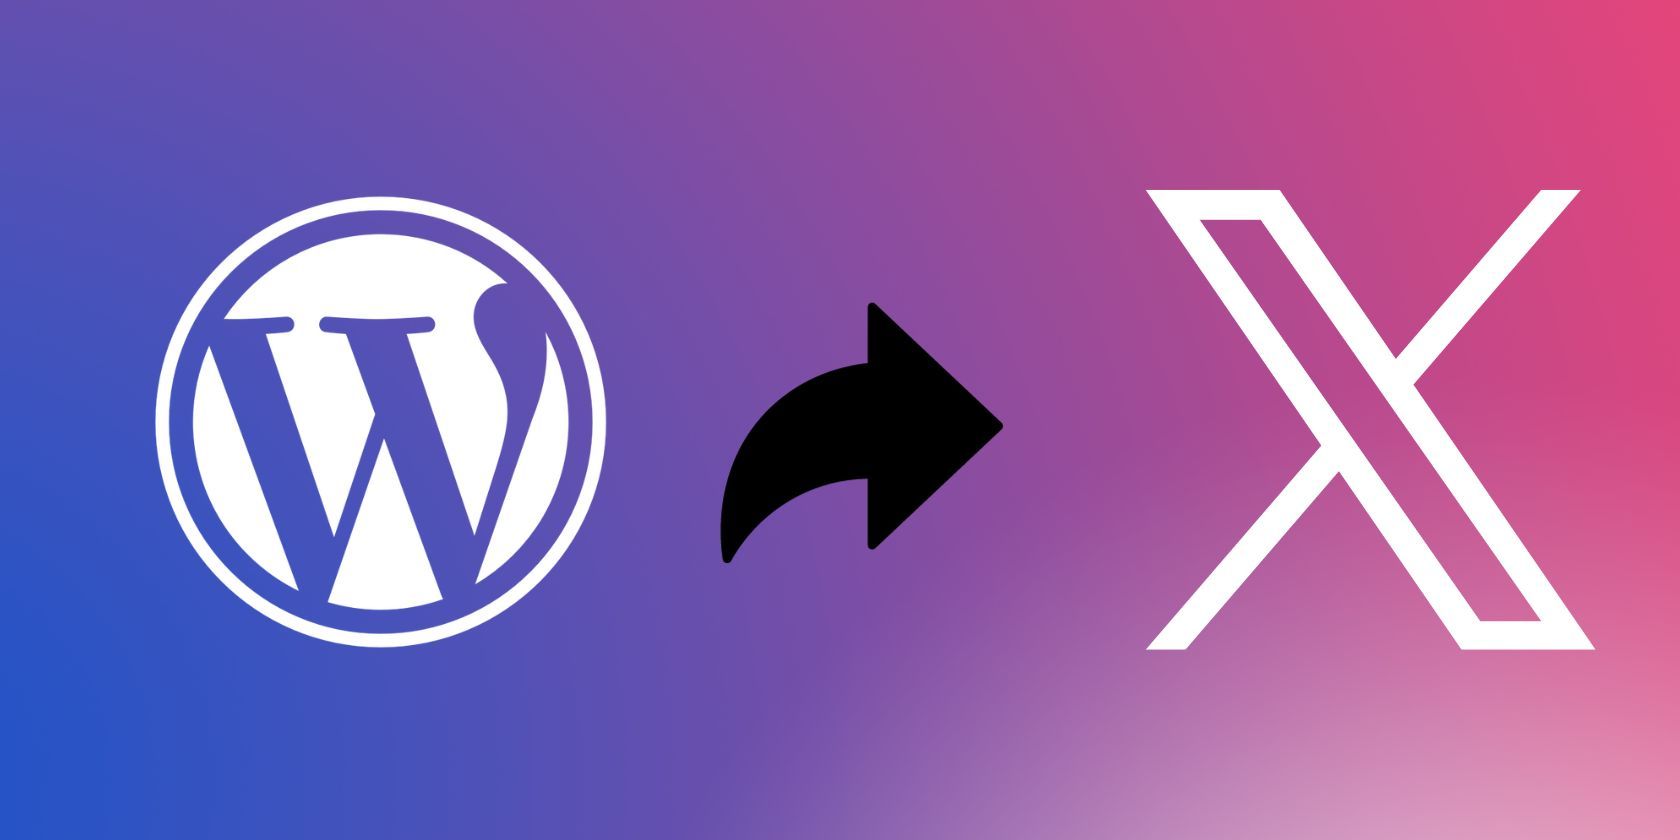 WordPress and X logo with a Share icon at the center